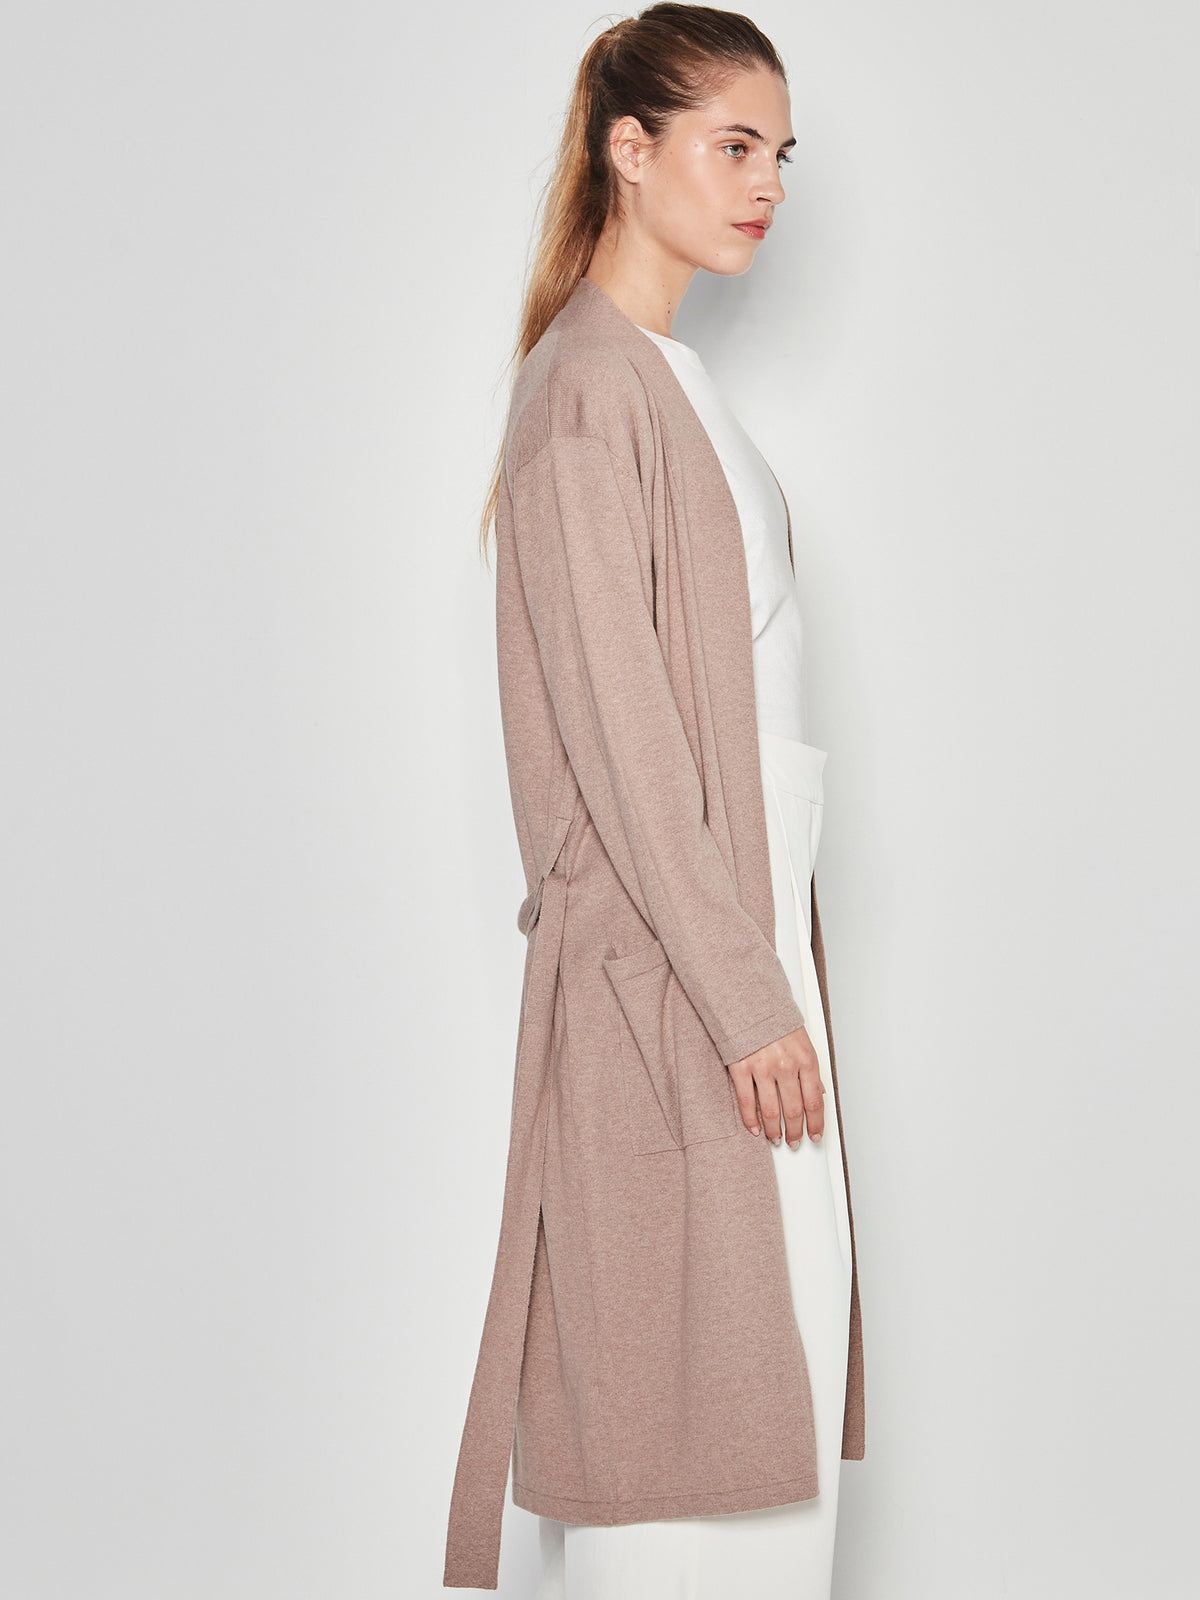 JHL Robe (Cotton Cashmere) Rosewood Marle